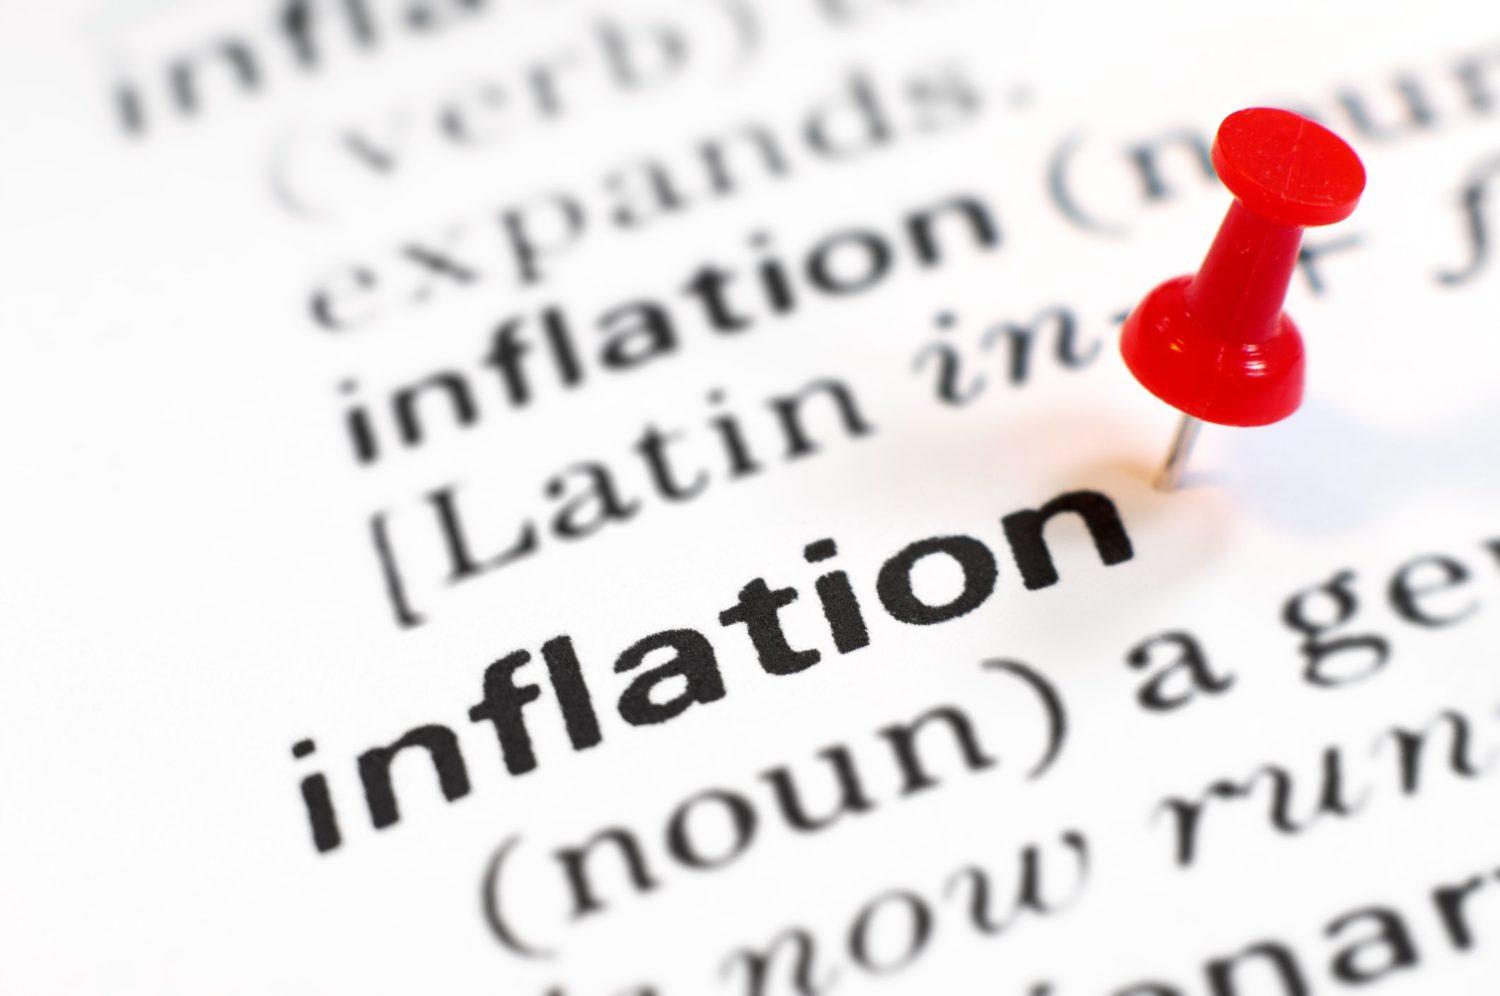 Inflation slows to 12 months low on base effect